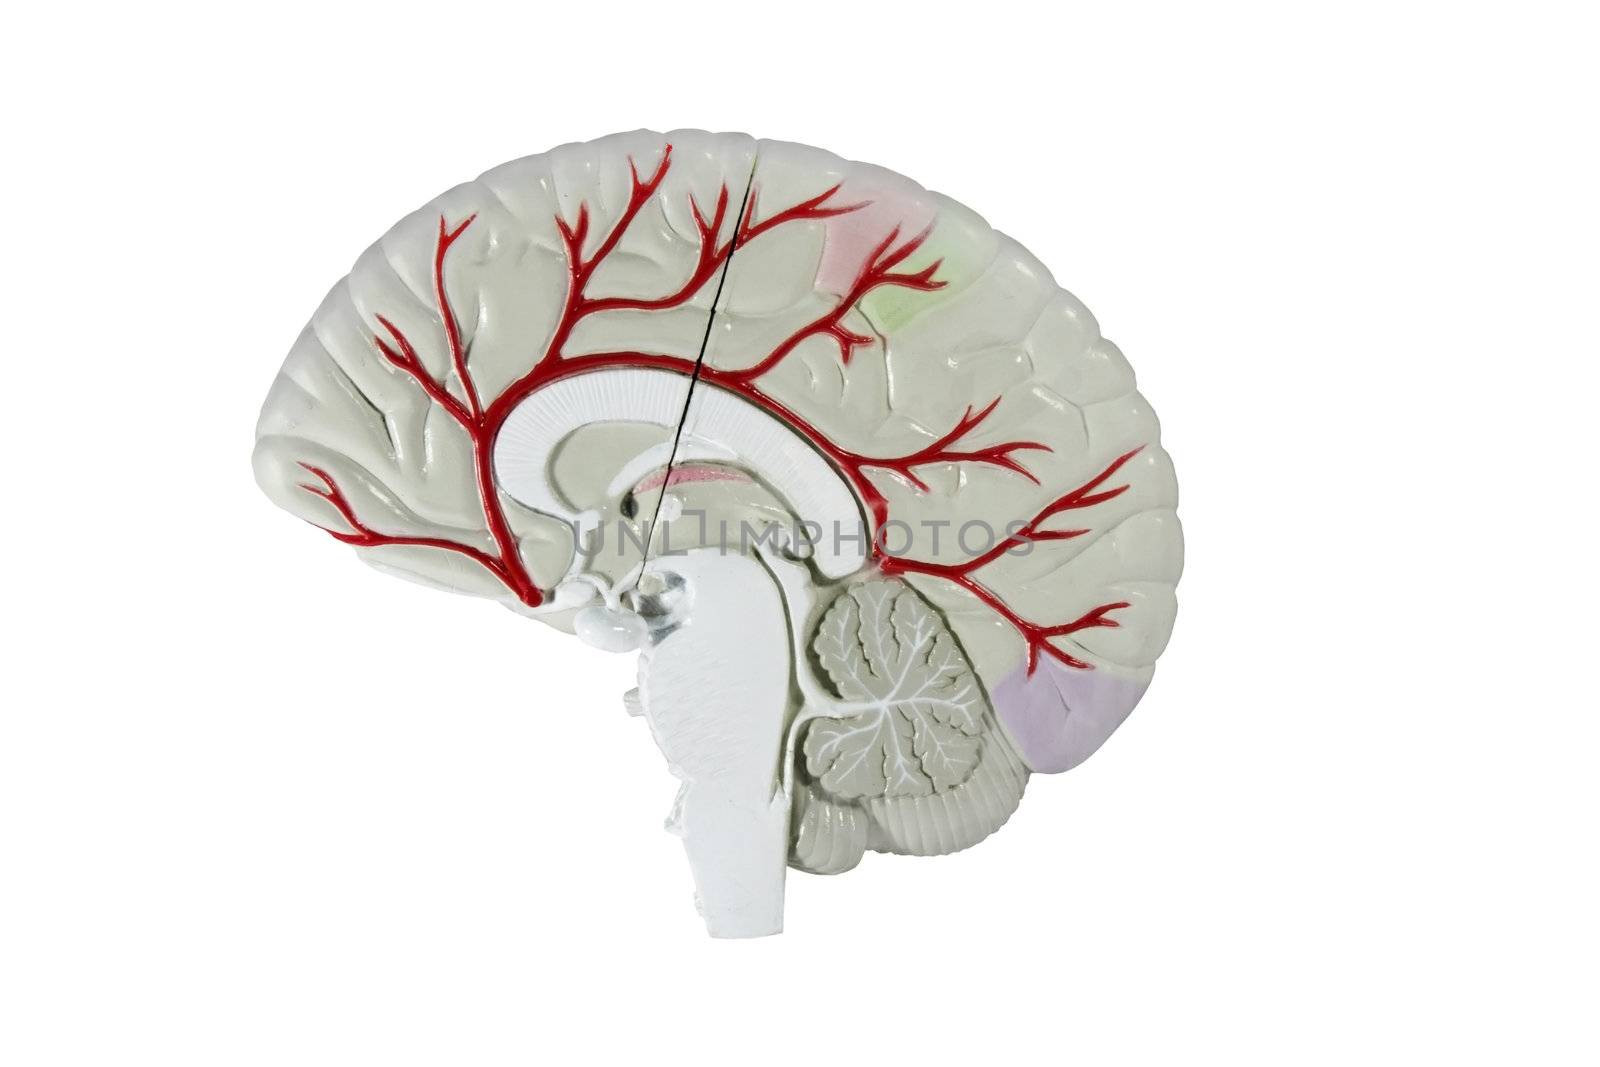 human brain cross section model by dcwcreations